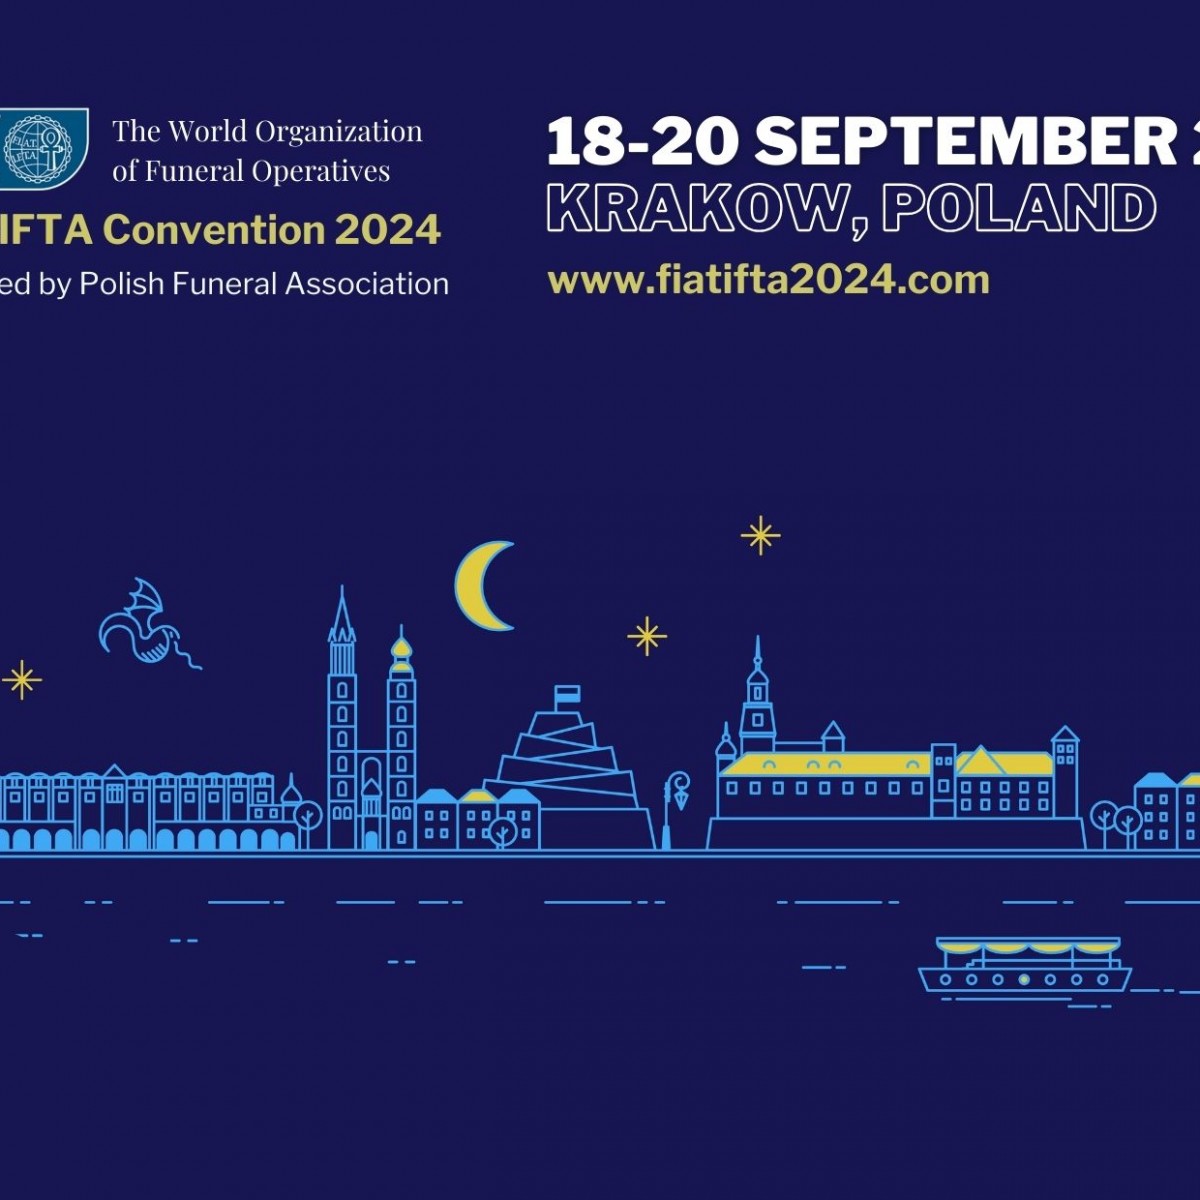 17th FIATIFTA Convention and 53rd ICD Annual Meeting of FIATIFTA 2024